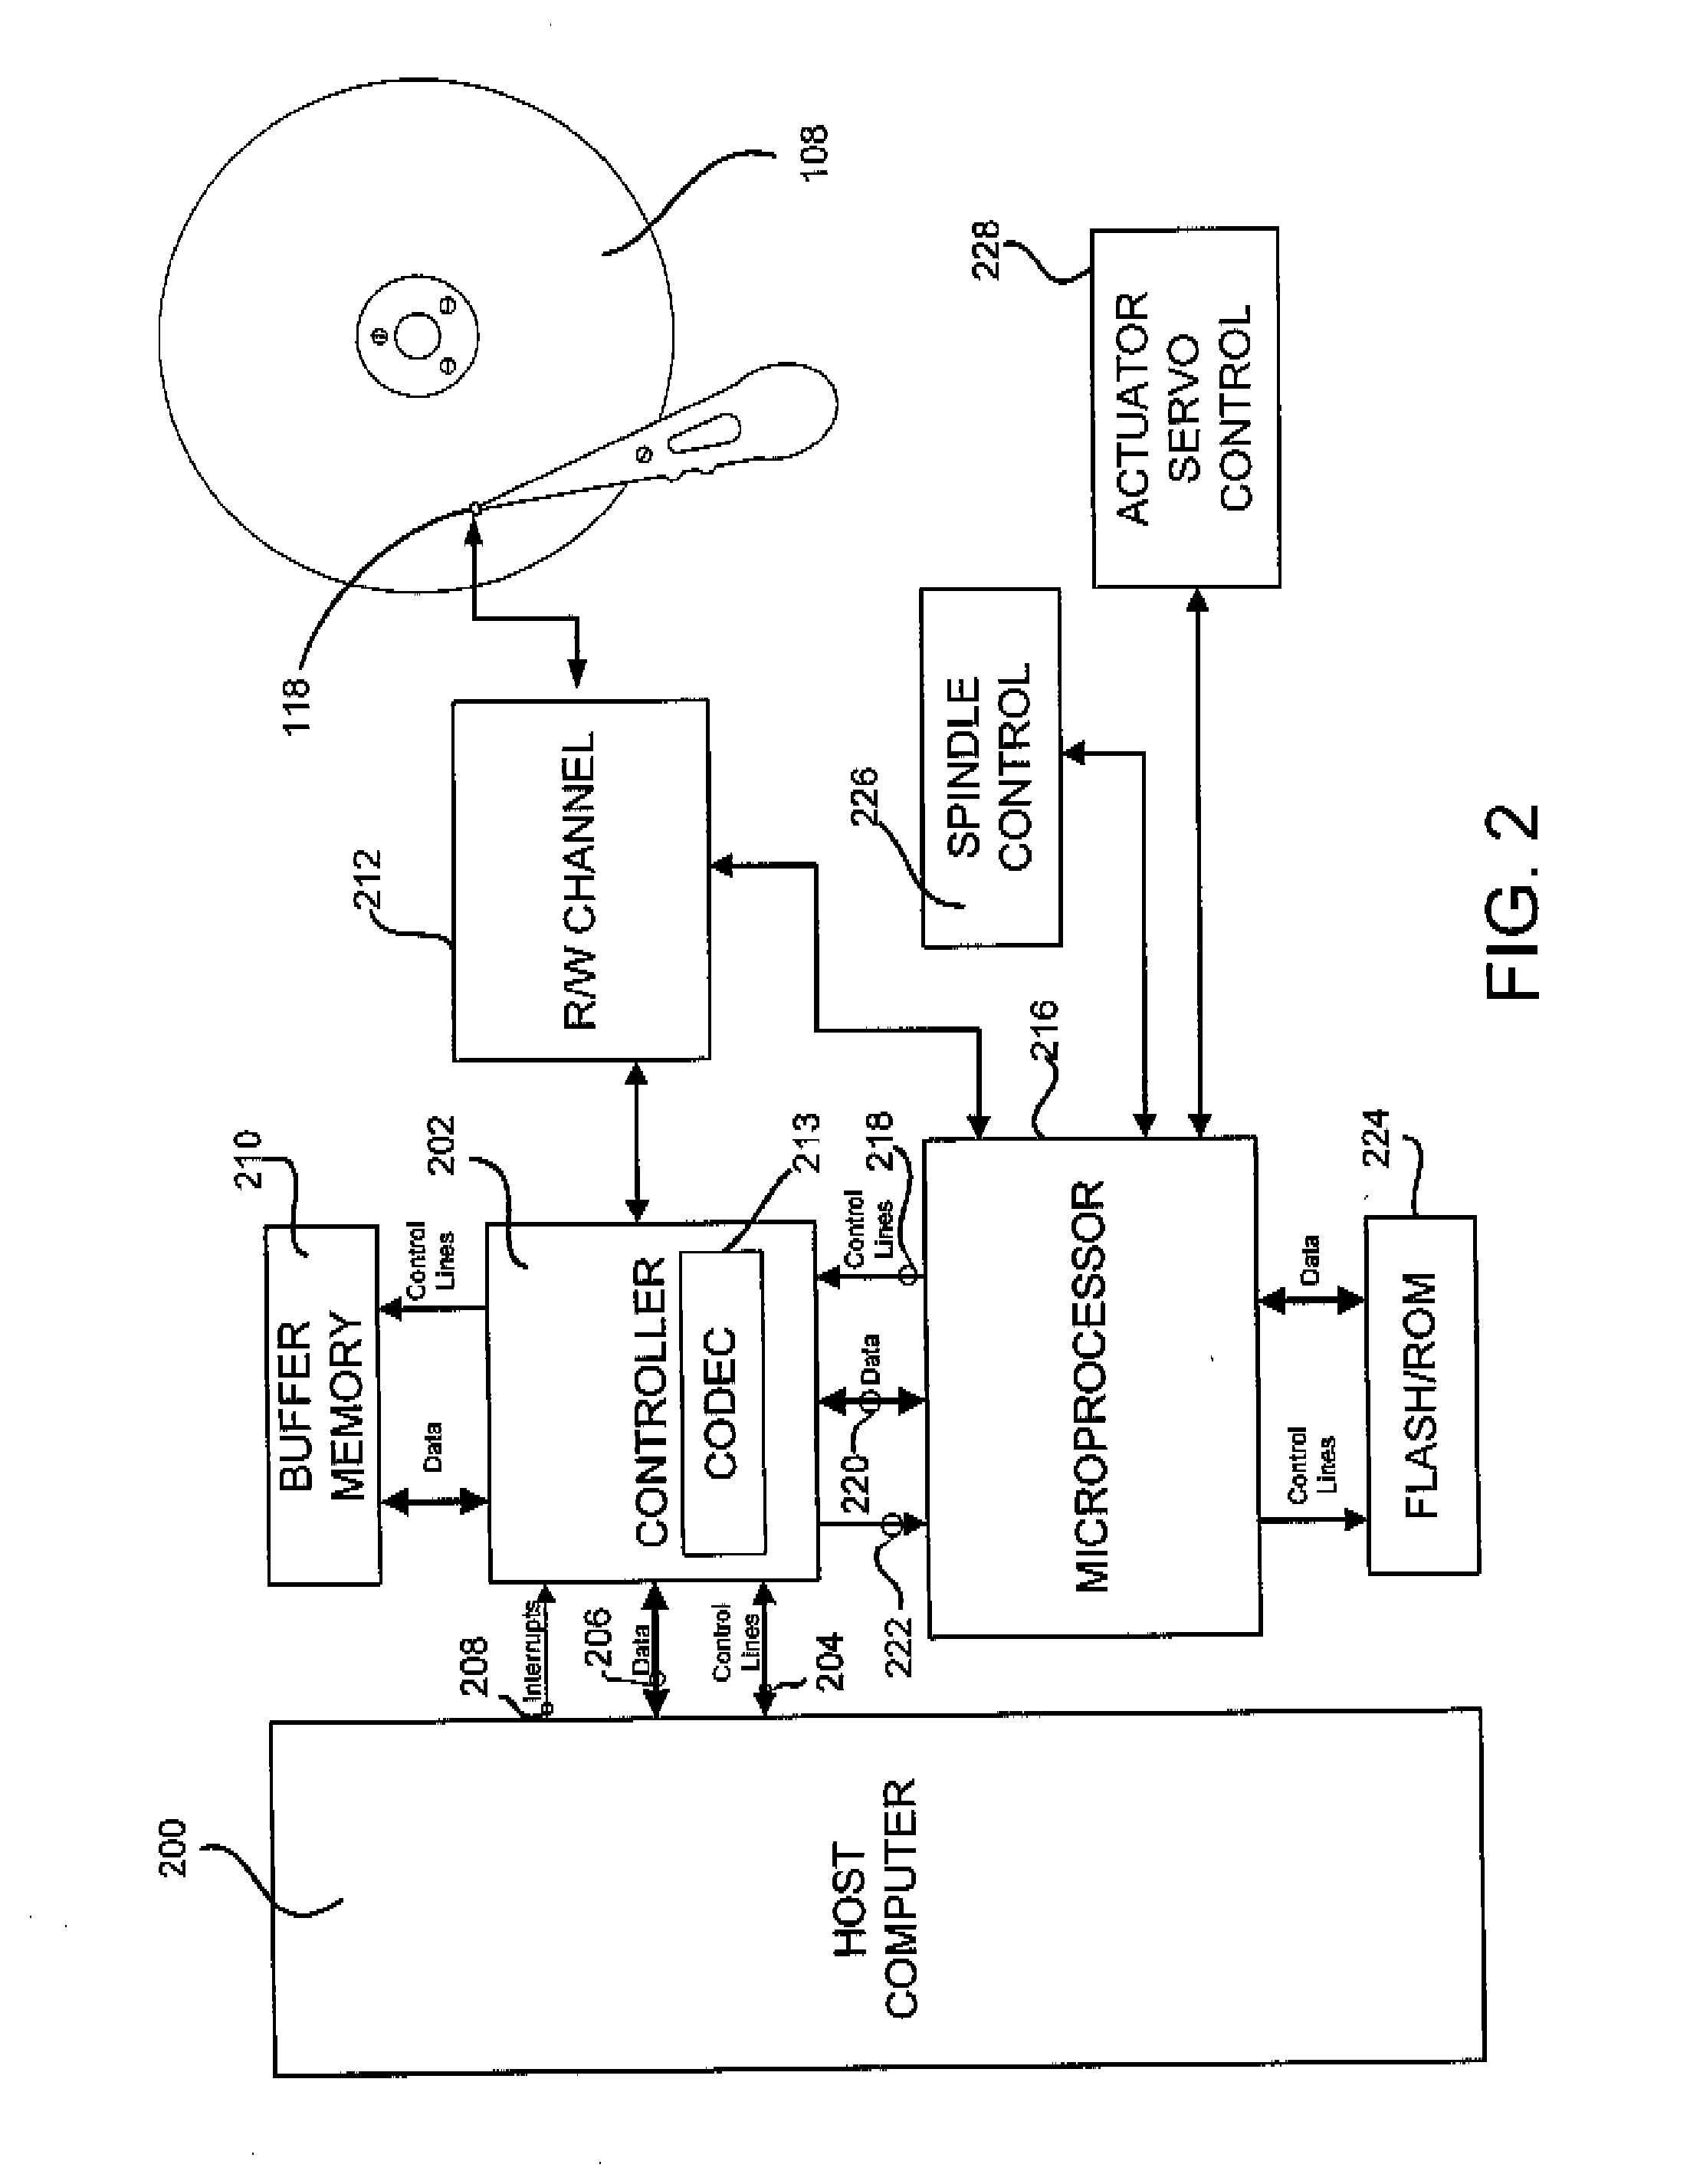 Computing an error detection code syndrome based on a correction pattern